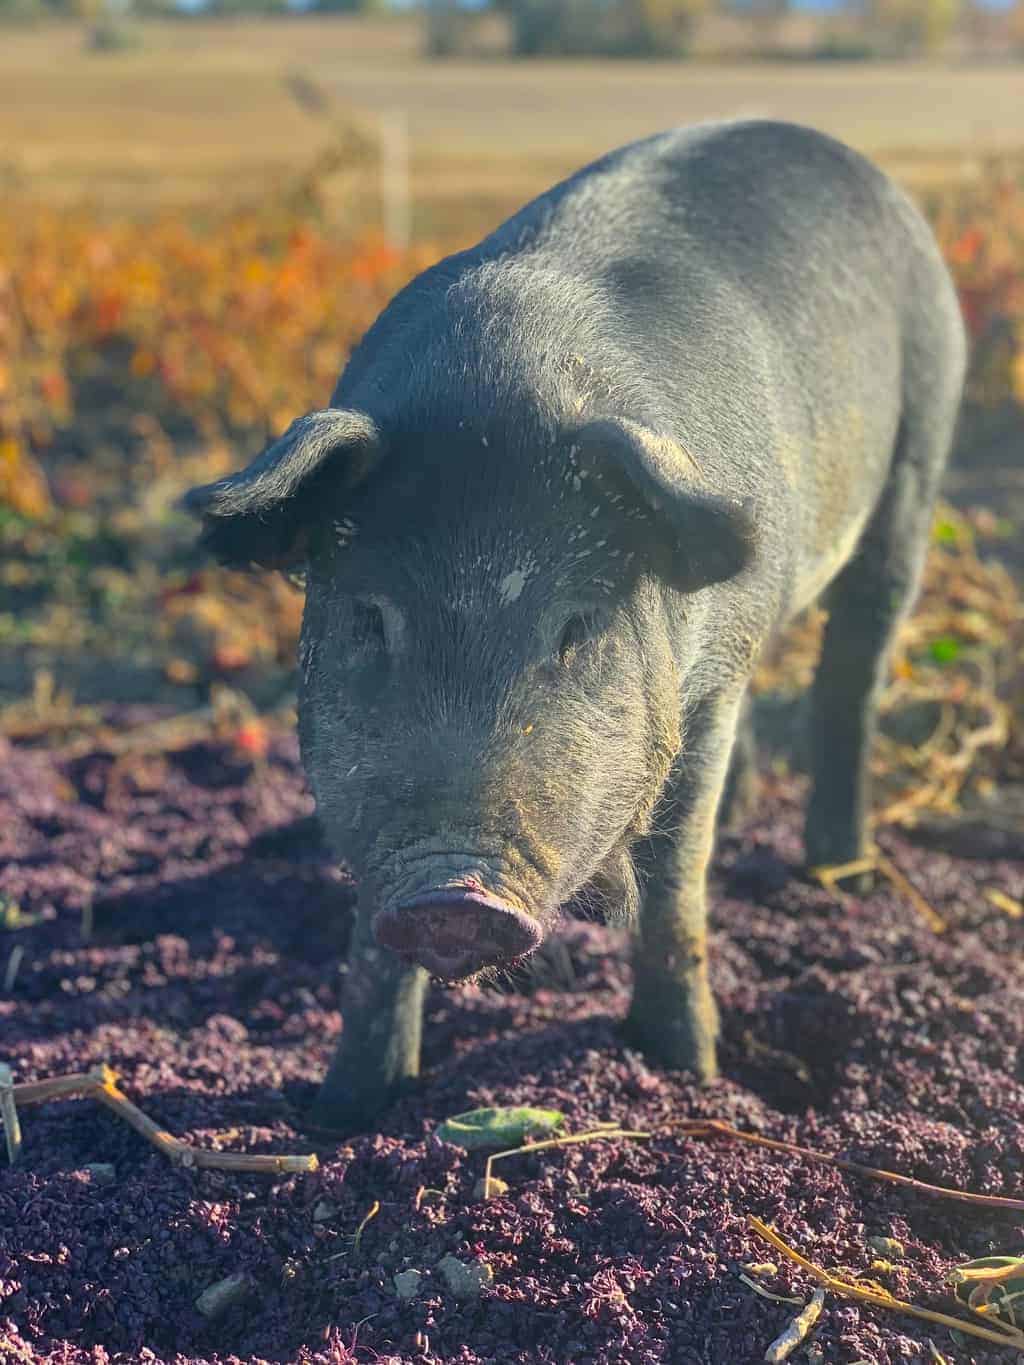 A pig at Black Cat Organic Farm in Boulder, Colorado savoring pomace from Bookcliff Vineyards in the fall.